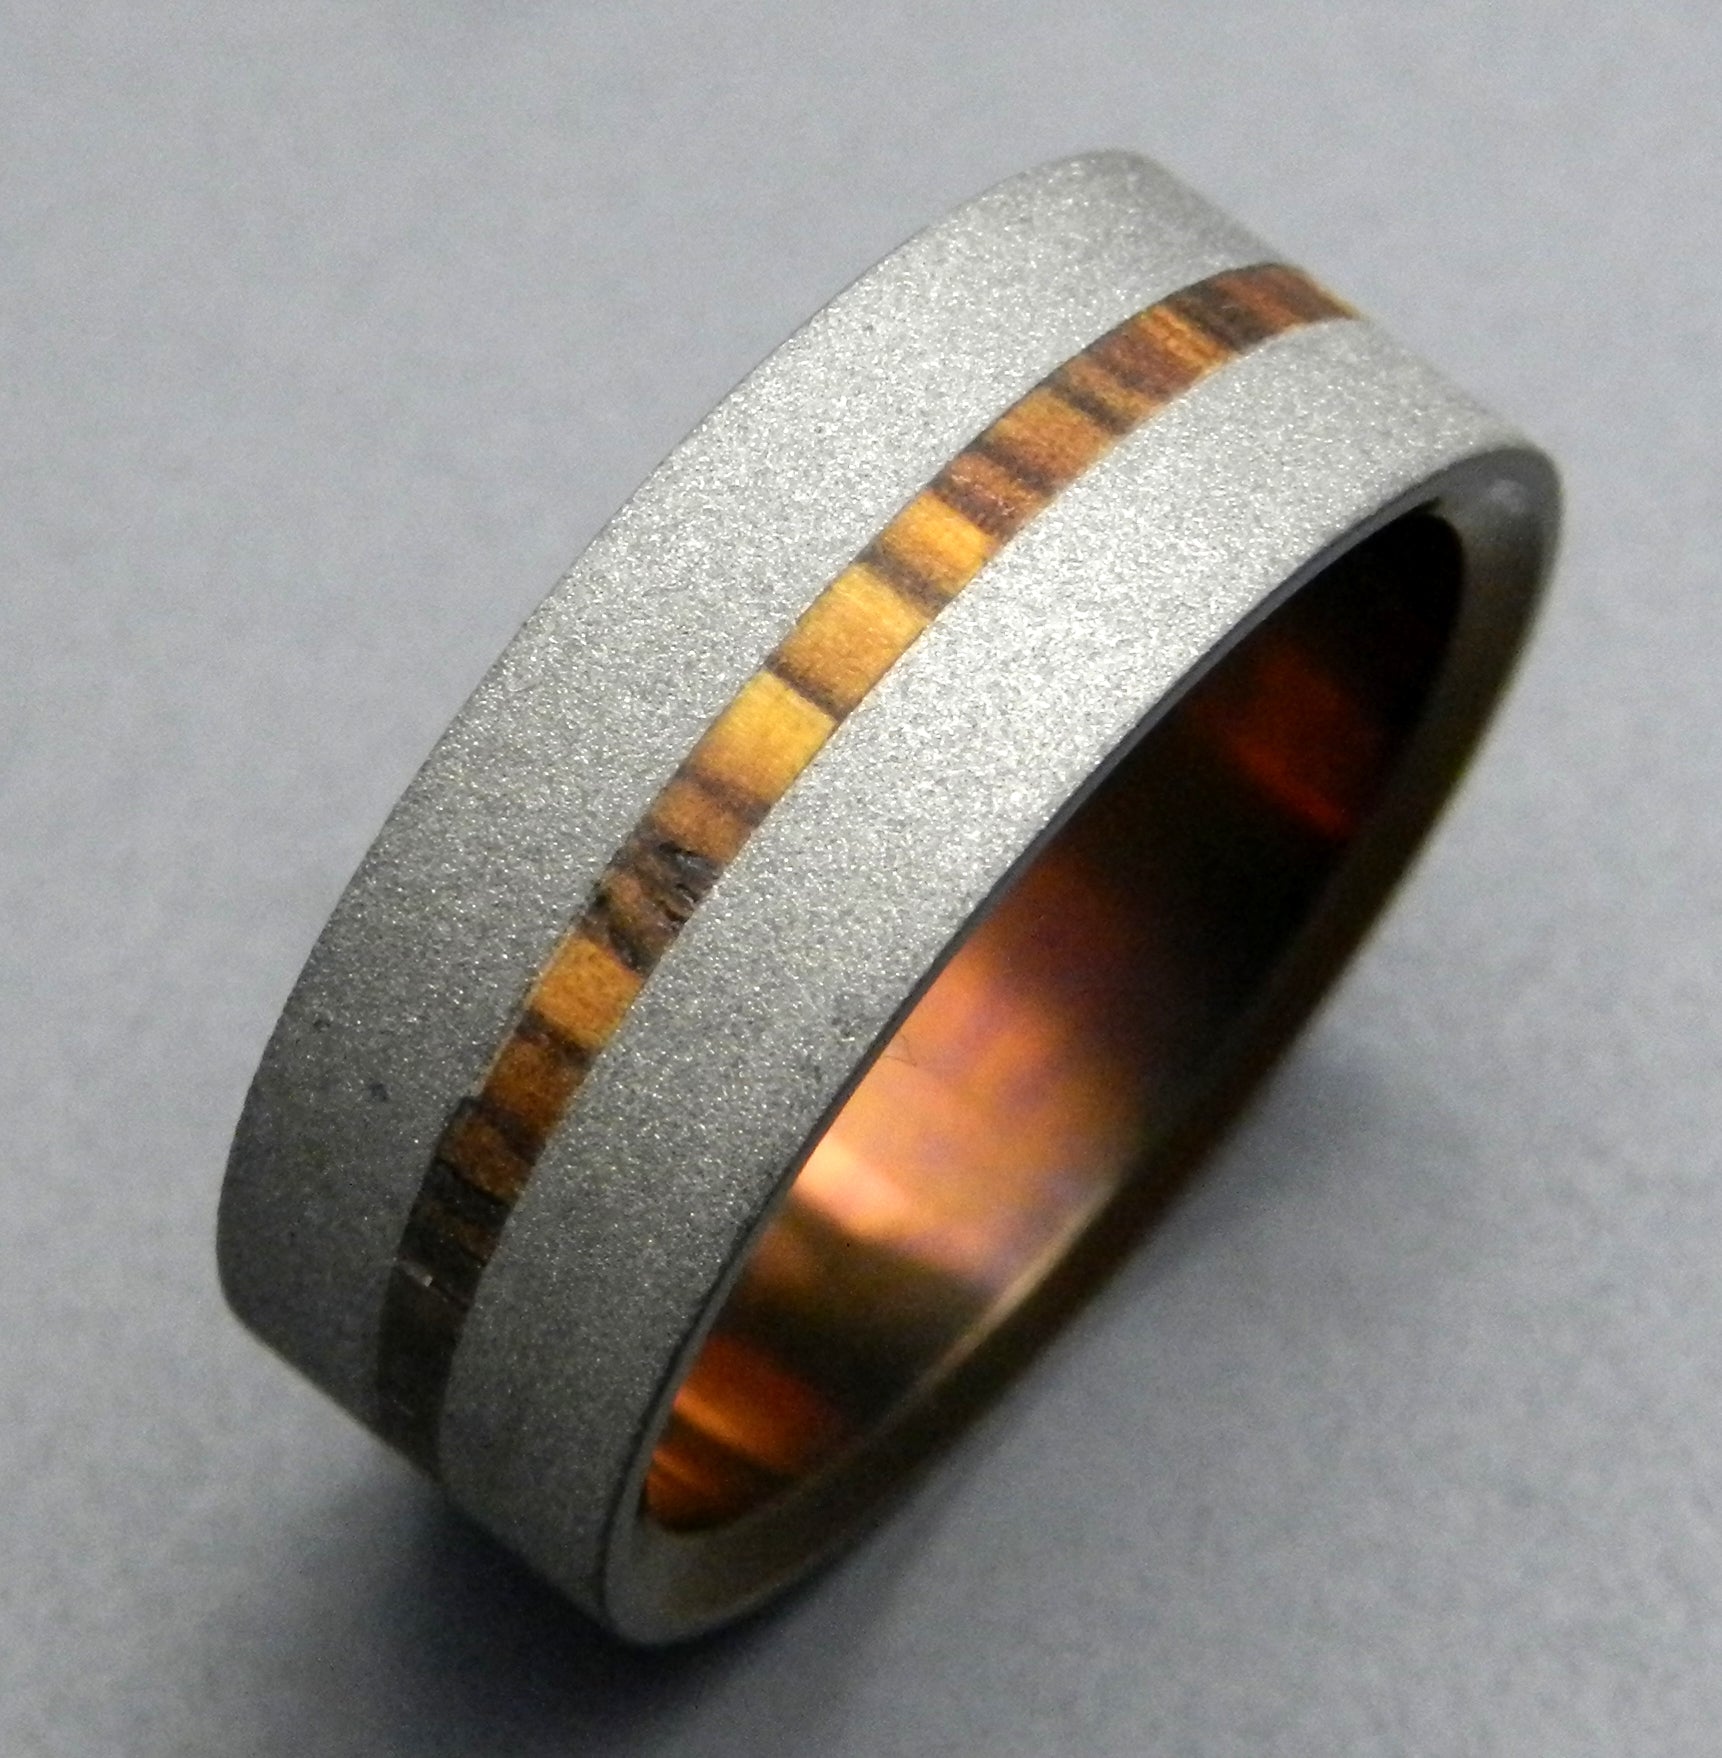 STRONG HEART | Cocobolo Wood & Hand Anodized Titanium Wedding Rings - Minter and Richter Designs